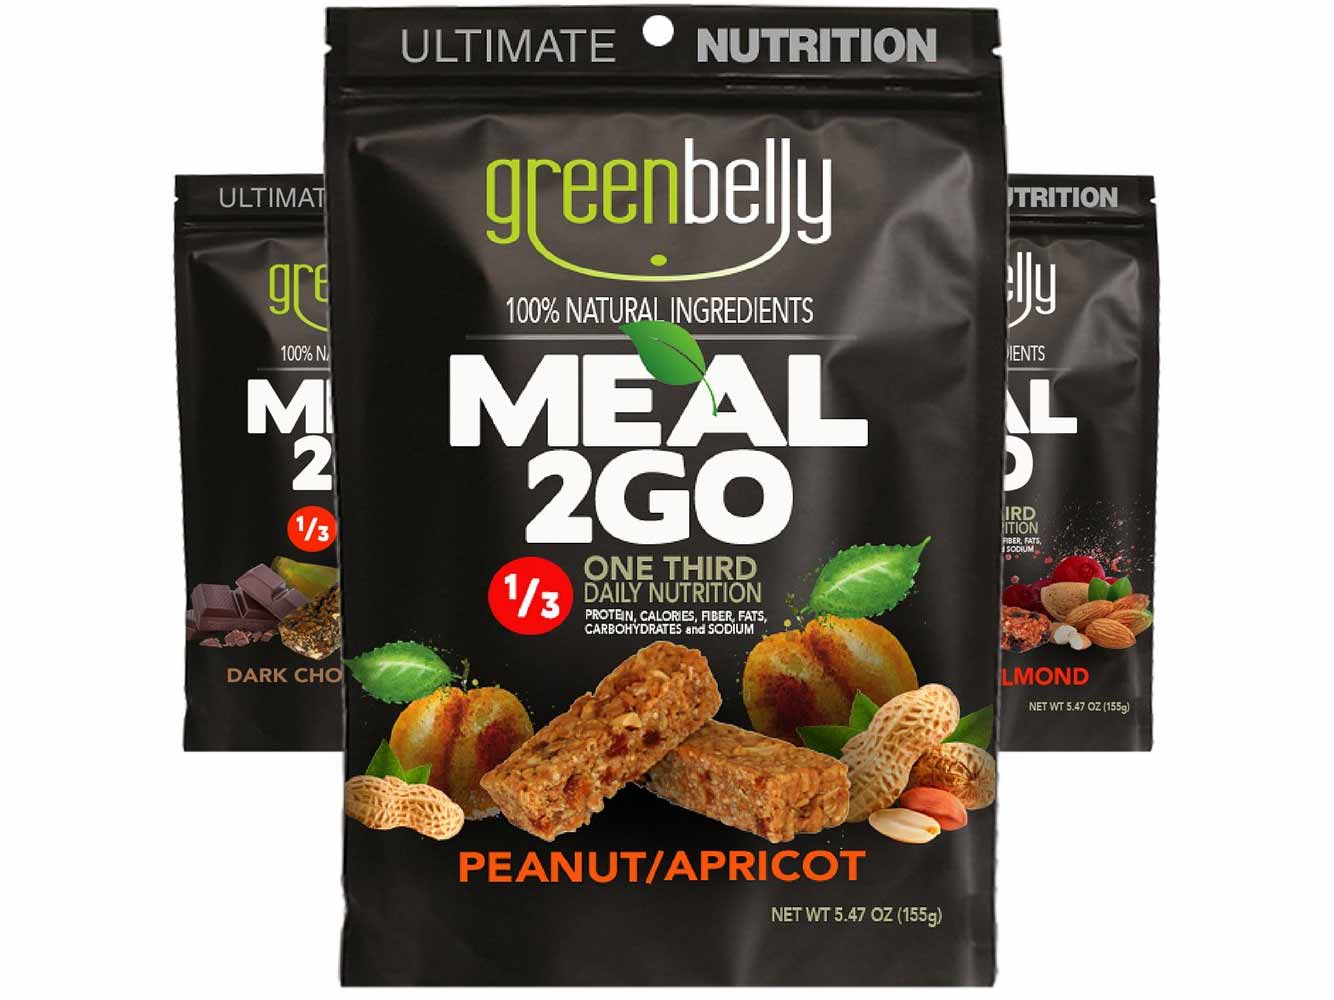 Greenbelly stoveless backpacking meals